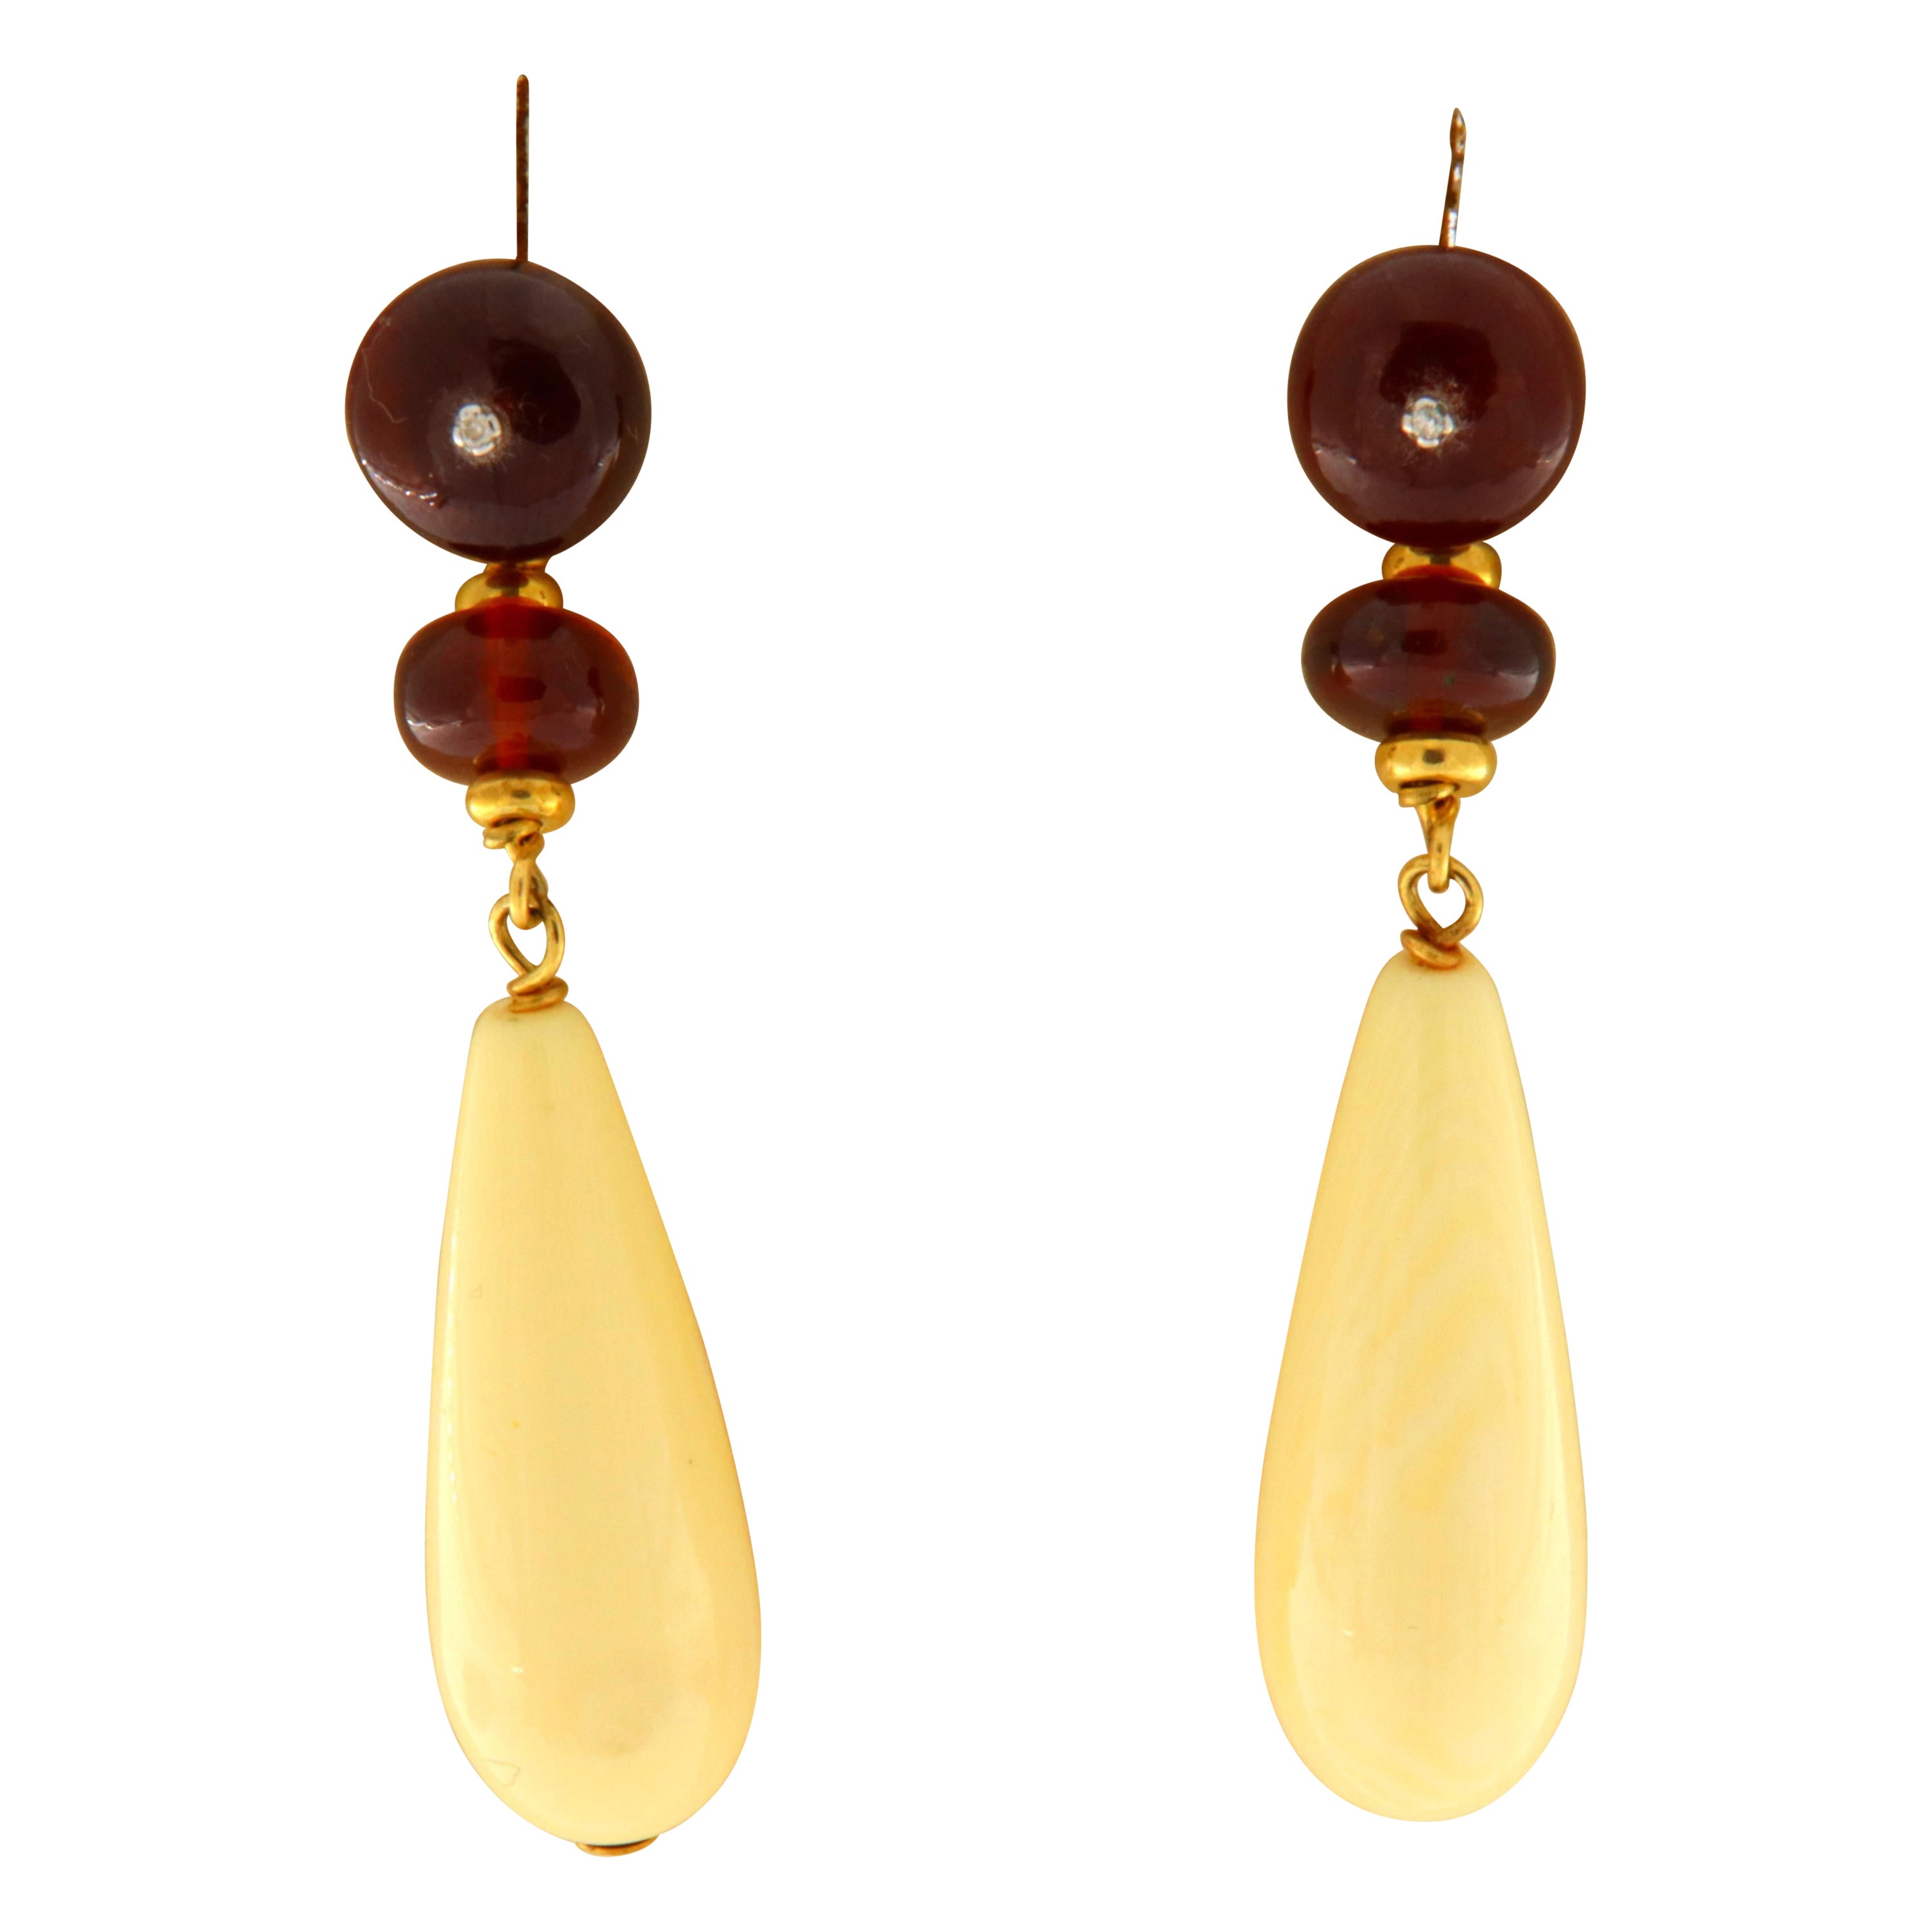 18 Kt Yellow Gold Earrings with Cabochon Garnet Stones, Fossil Ivory Drops